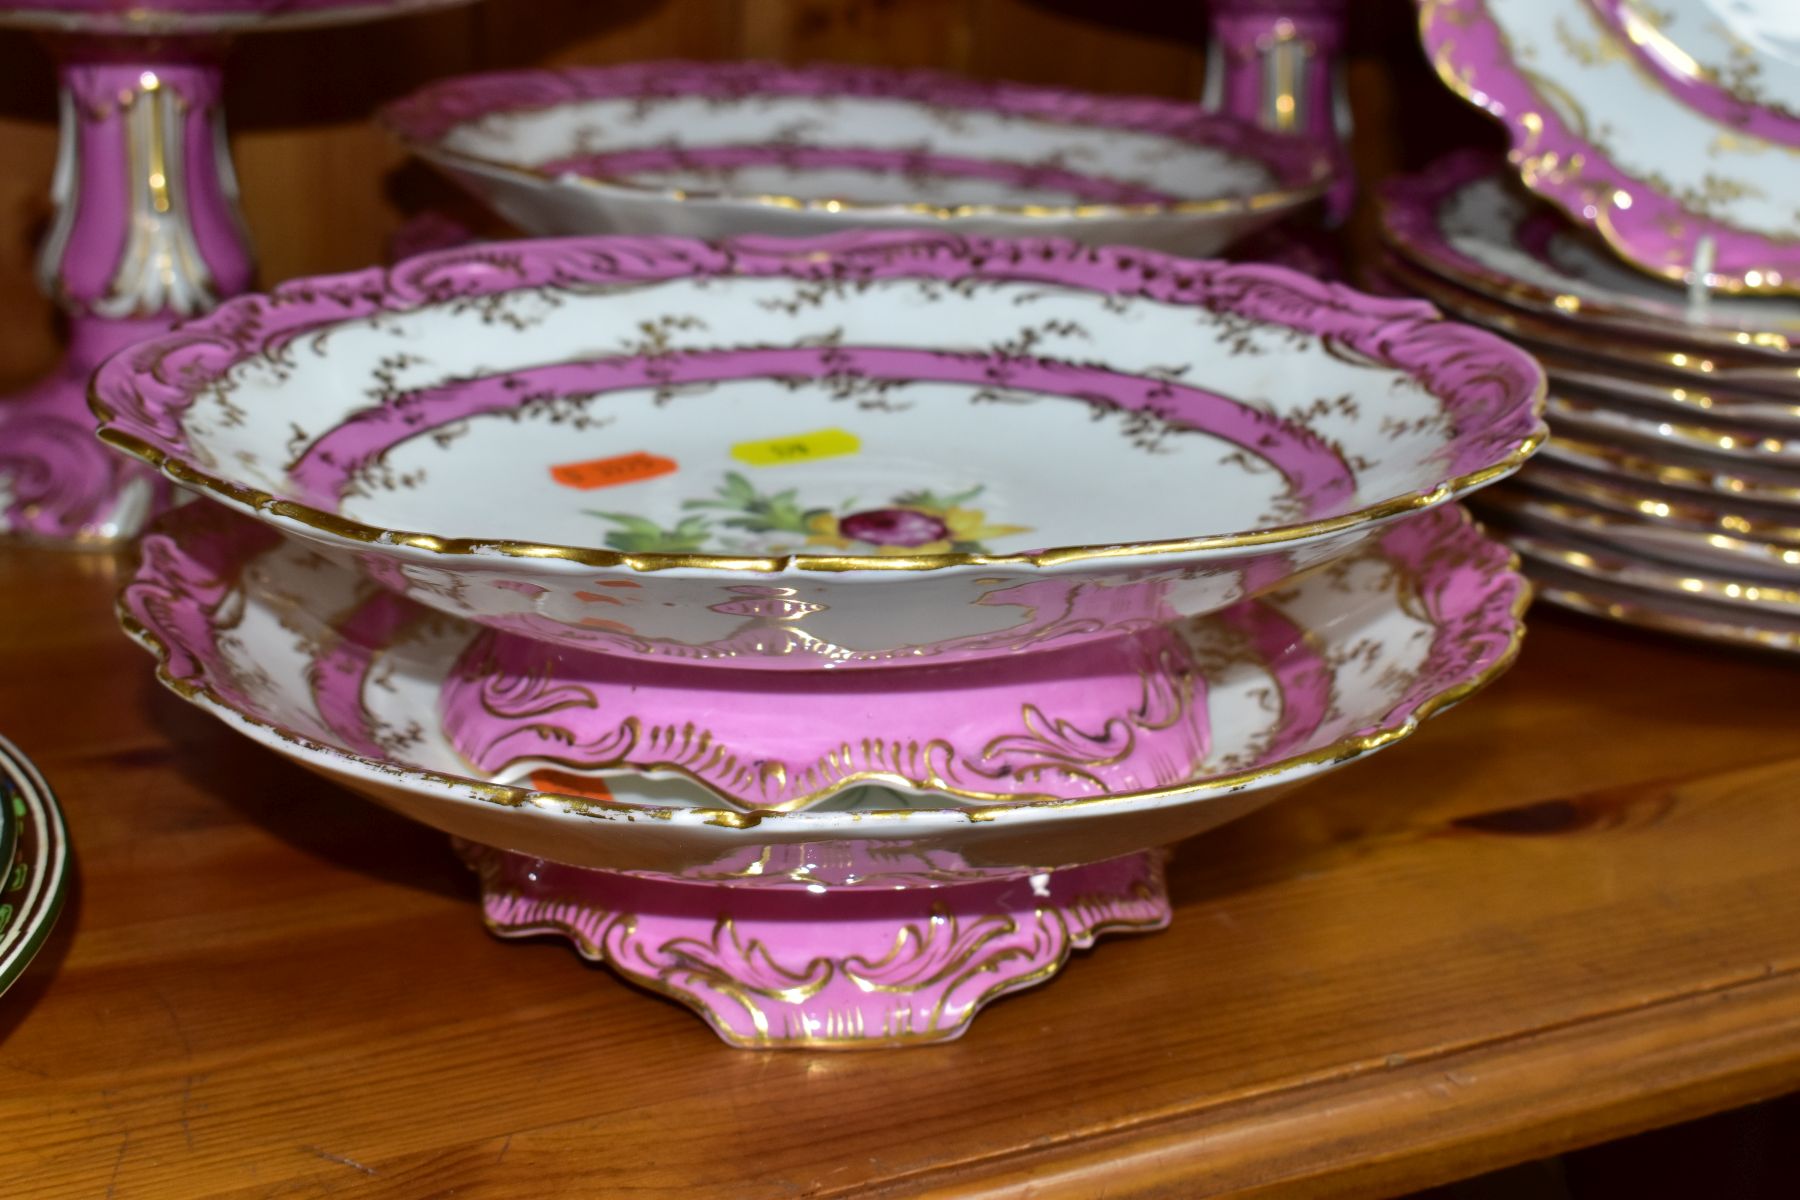 A SIXTEEN PIECE LATE VICTORIAN/EDWARDIAN DESSERT SET, POSSIBLY COALPORT, with gilt and modelled - Image 3 of 10